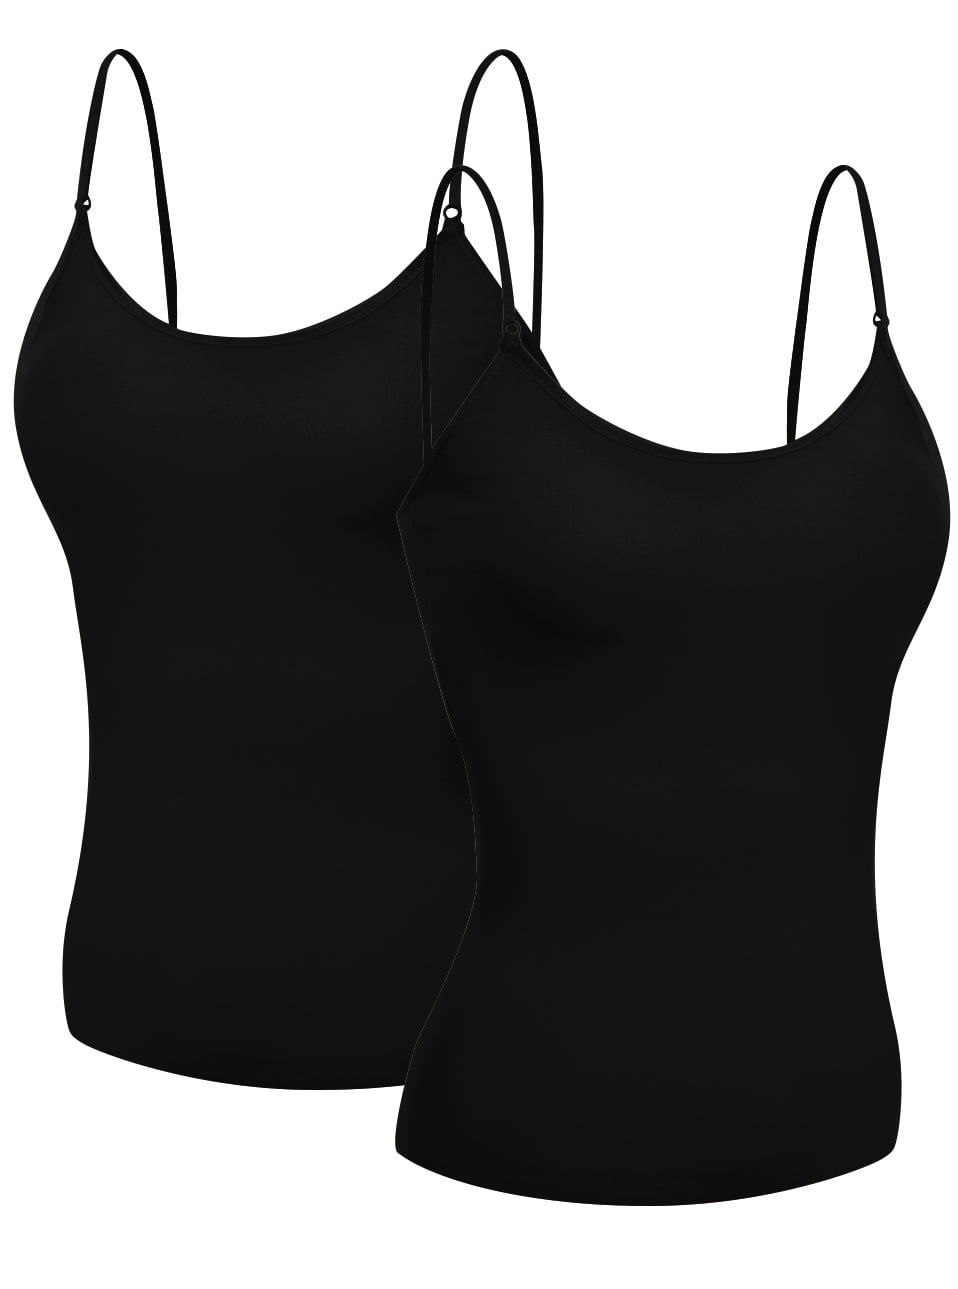 Padded Camisole No Shelf, No Built in Bra, No Elastic Band, No Bra Tank Top  Cami Lace Back Black Mesh Small at  Women's Clothing store